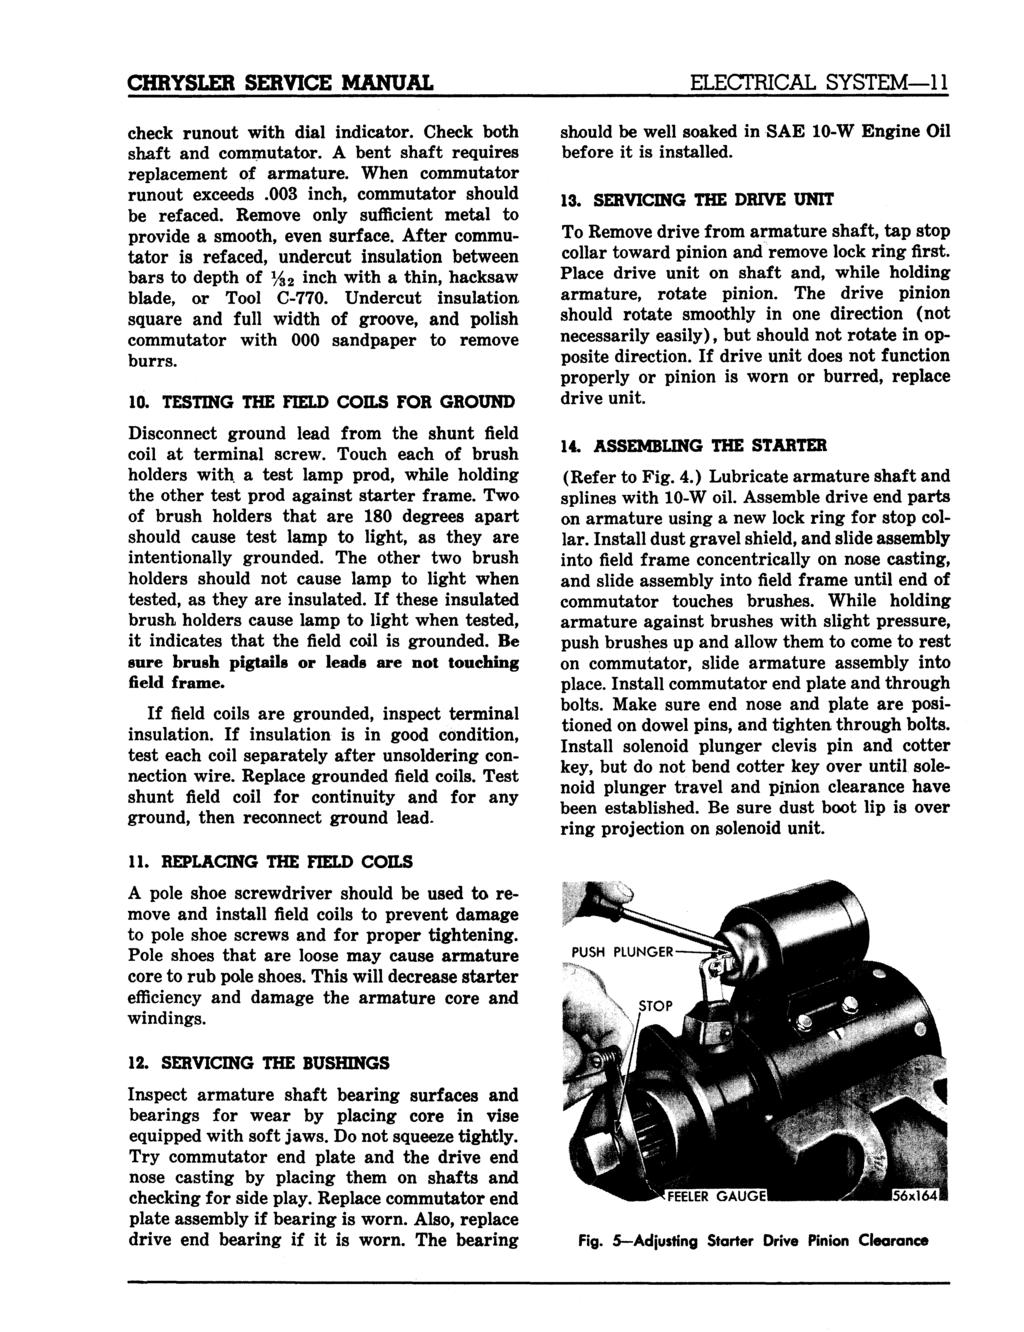 CHRYSLER SERVICE MANUAL check runout with dial indicator. Check both shaft and commutator. A bent shaft requires replacement of armature. When commutator runout exceeds.